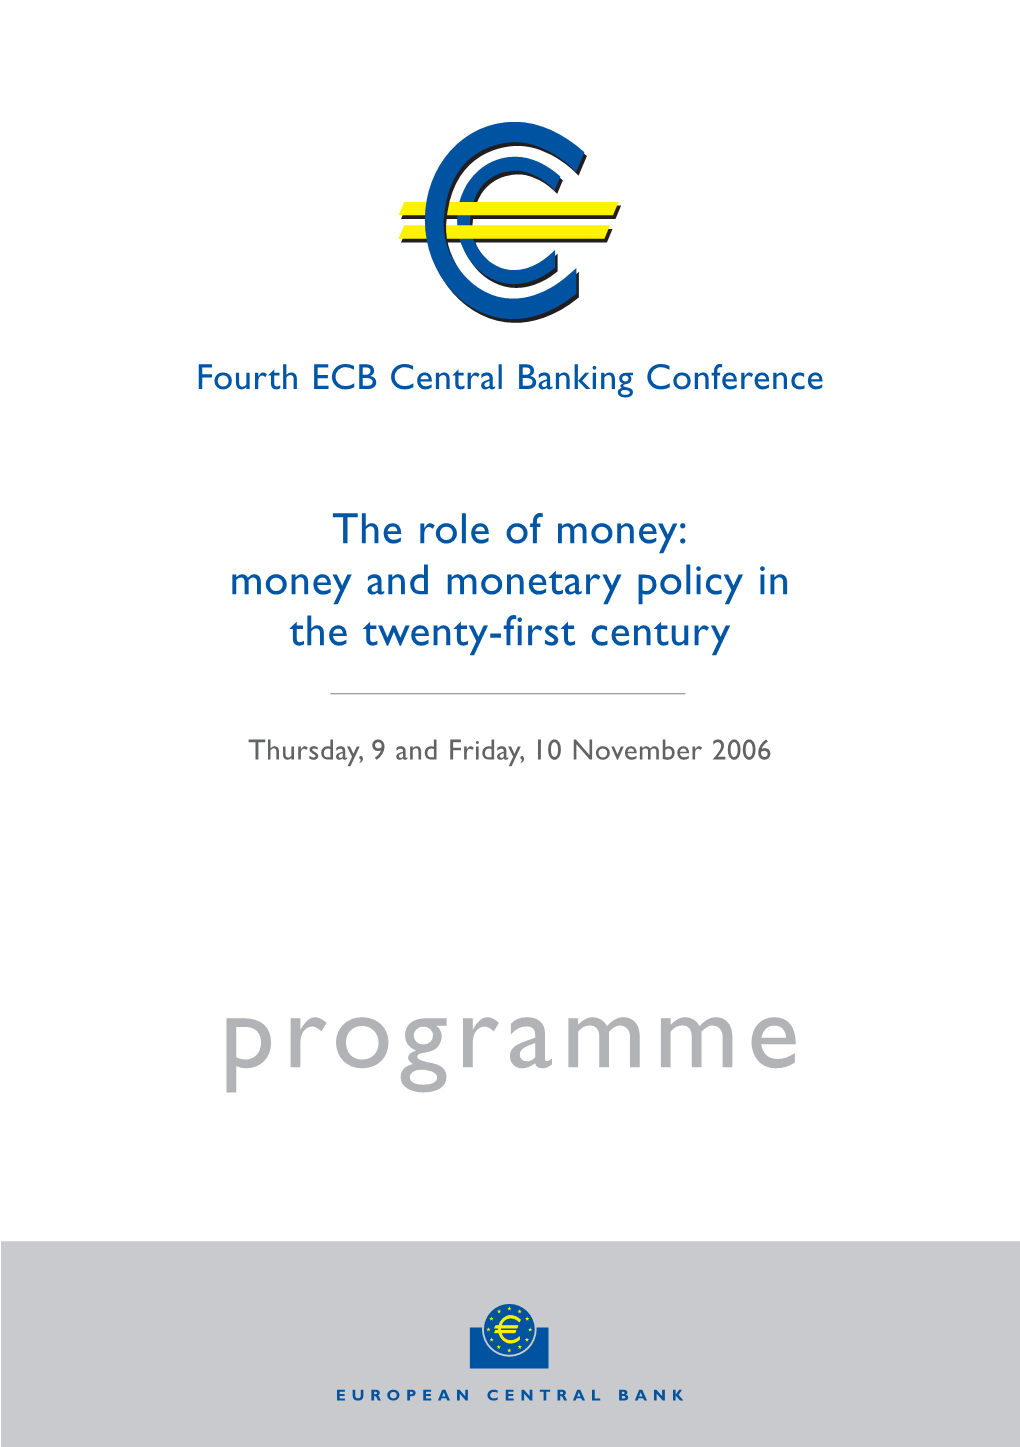 Fourth ECB Central Banking Conference